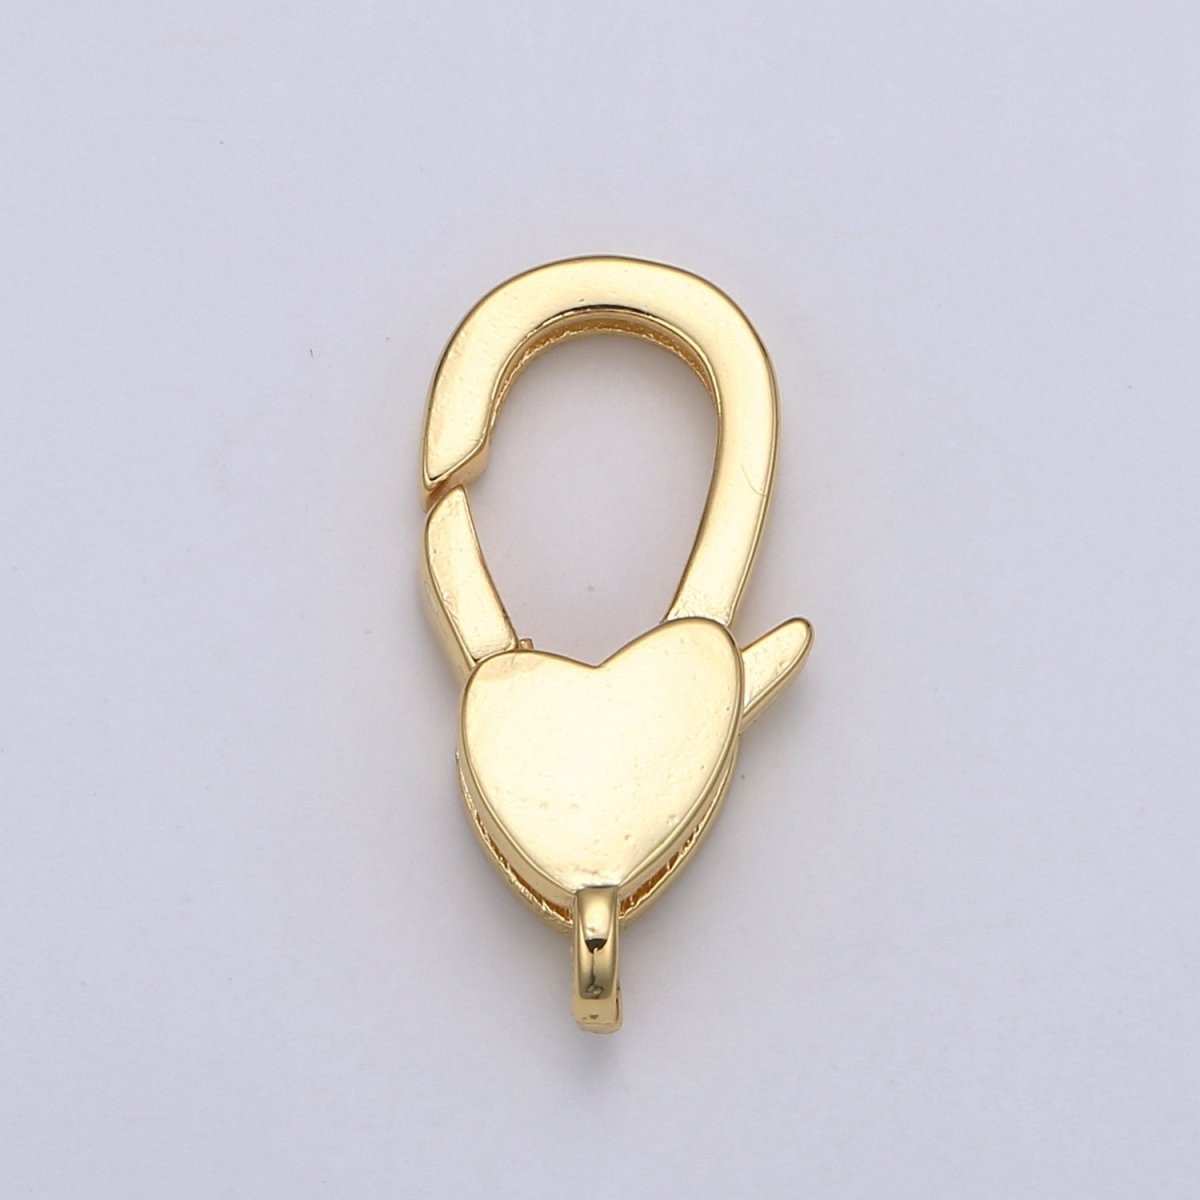 24K Gold Filled Heart Lobster Clasp For DIY Jewelry Making For Bracelet Necklace Supplies L-173 - DLUXCA